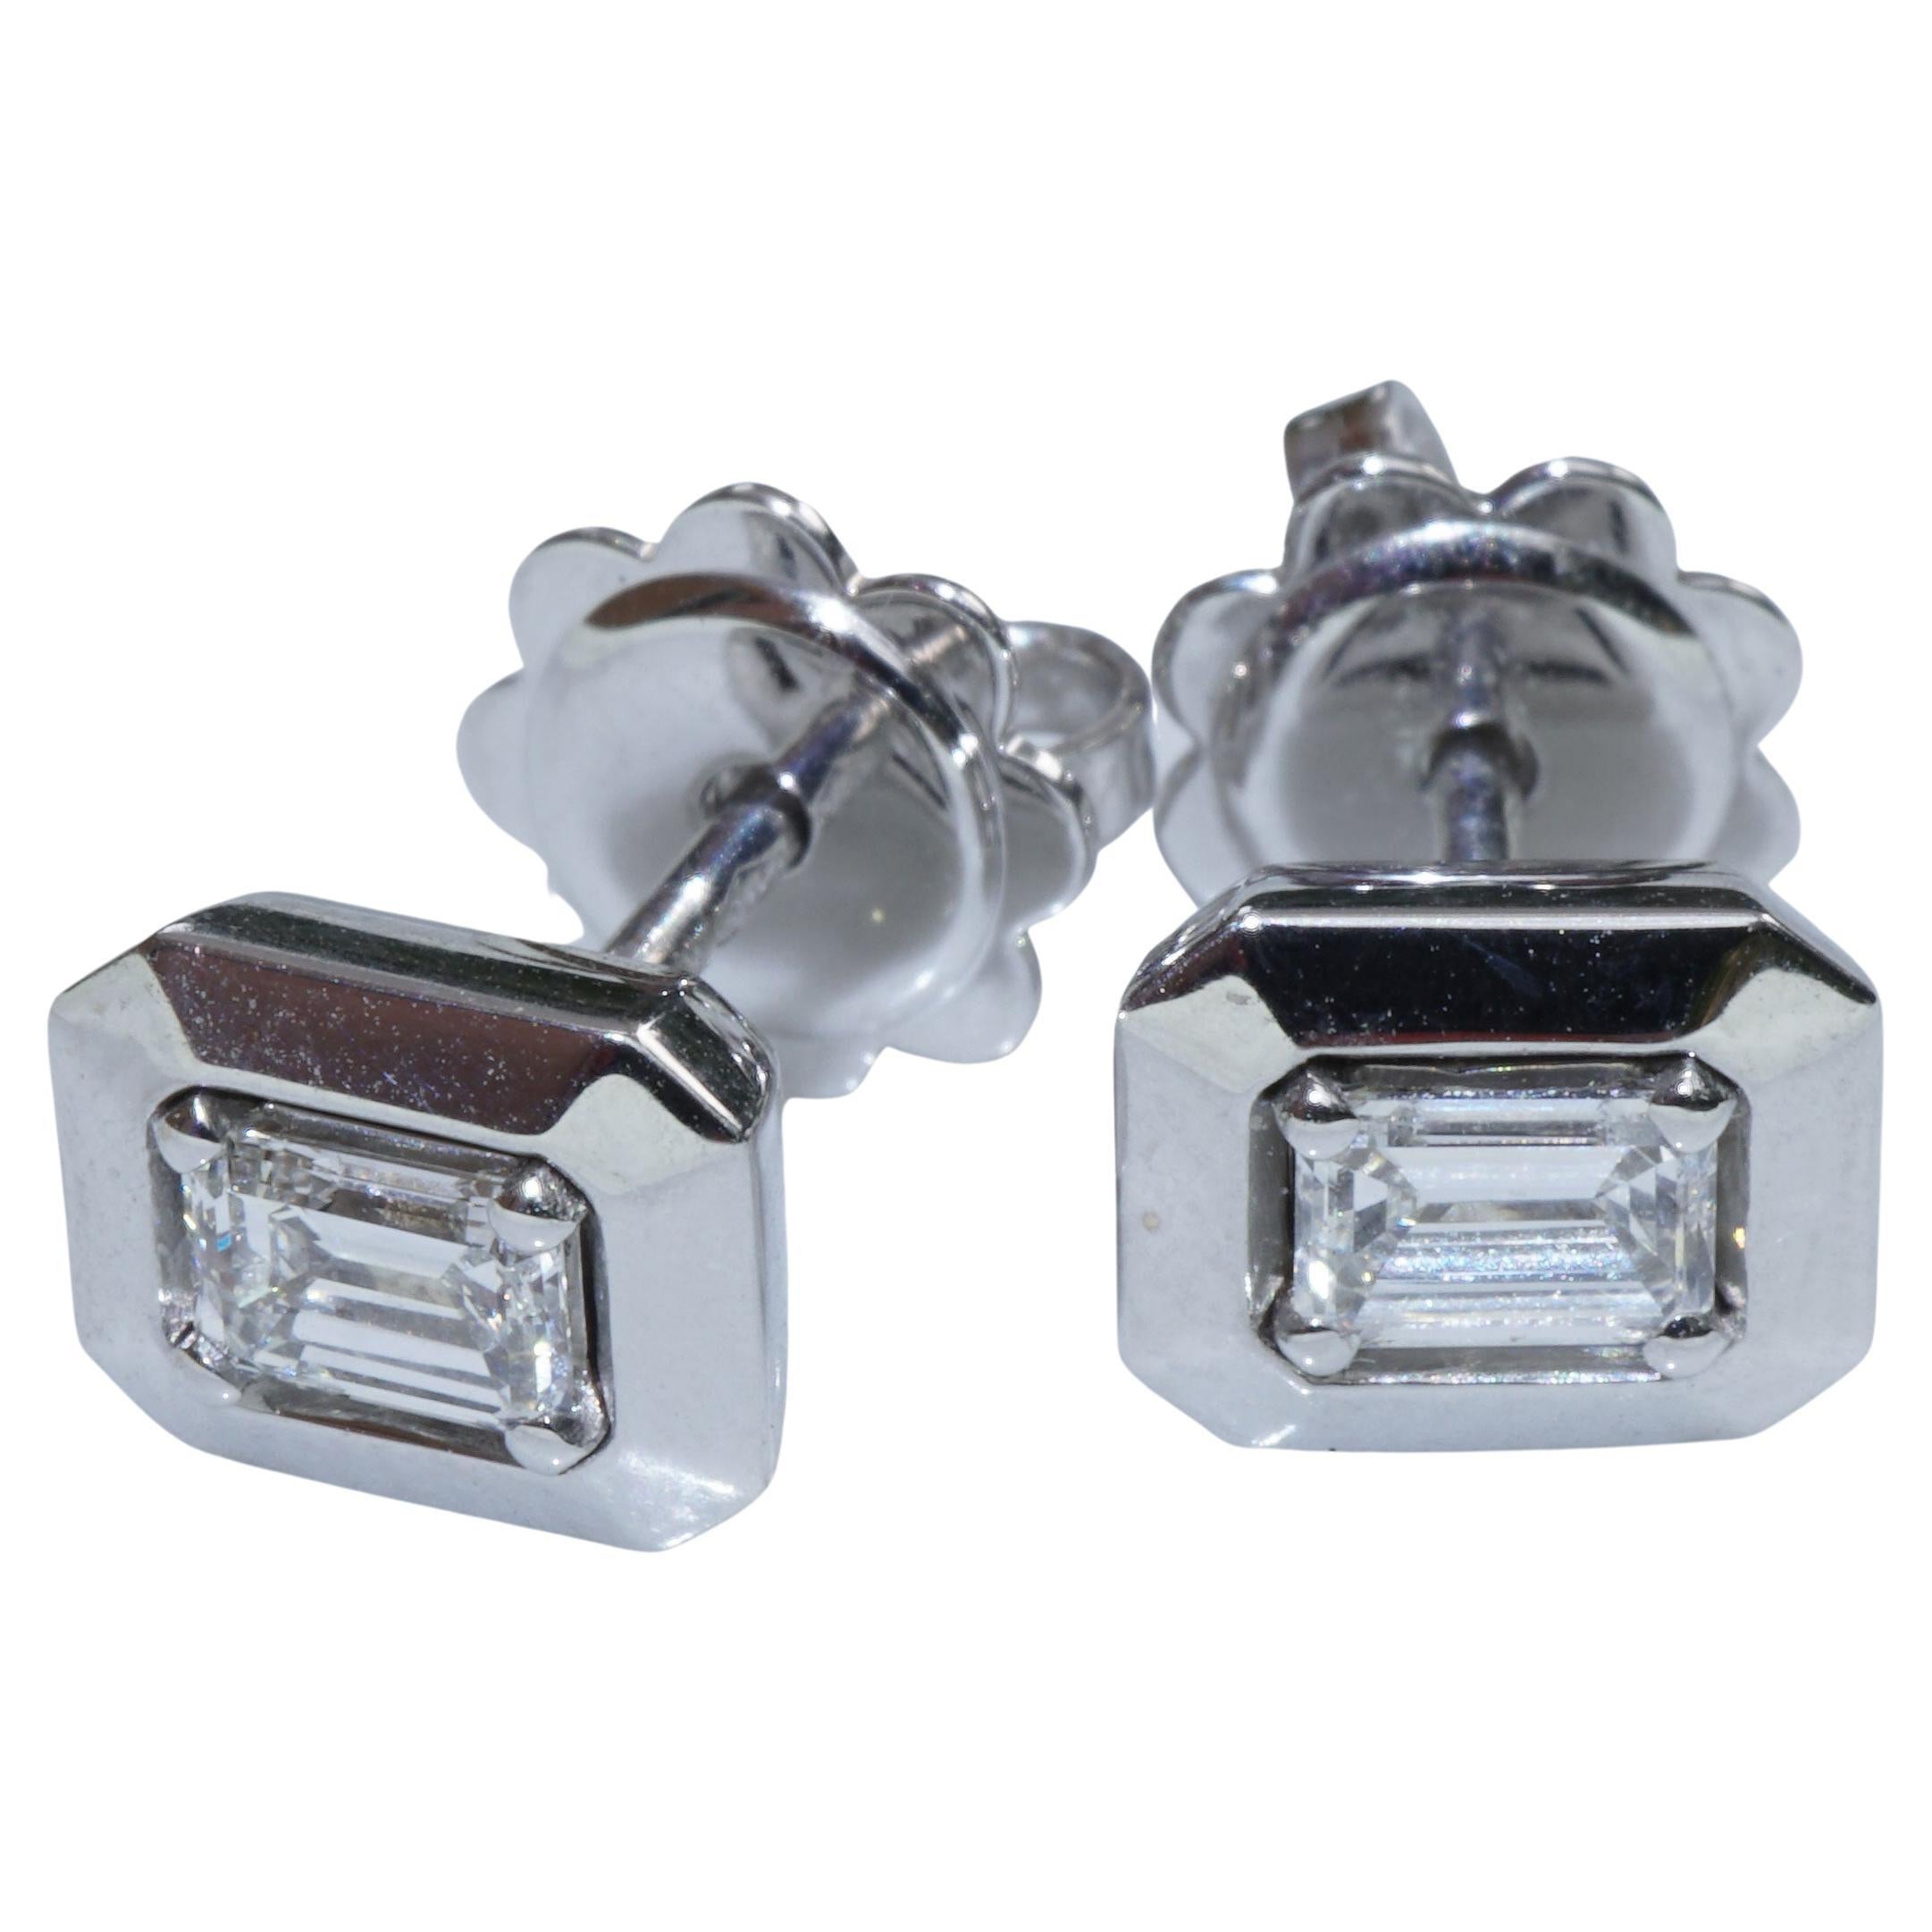 Diamond Emerald Cut Ear Studs Earrings total 0.40 ct TW VS made in Italy Great For Sale